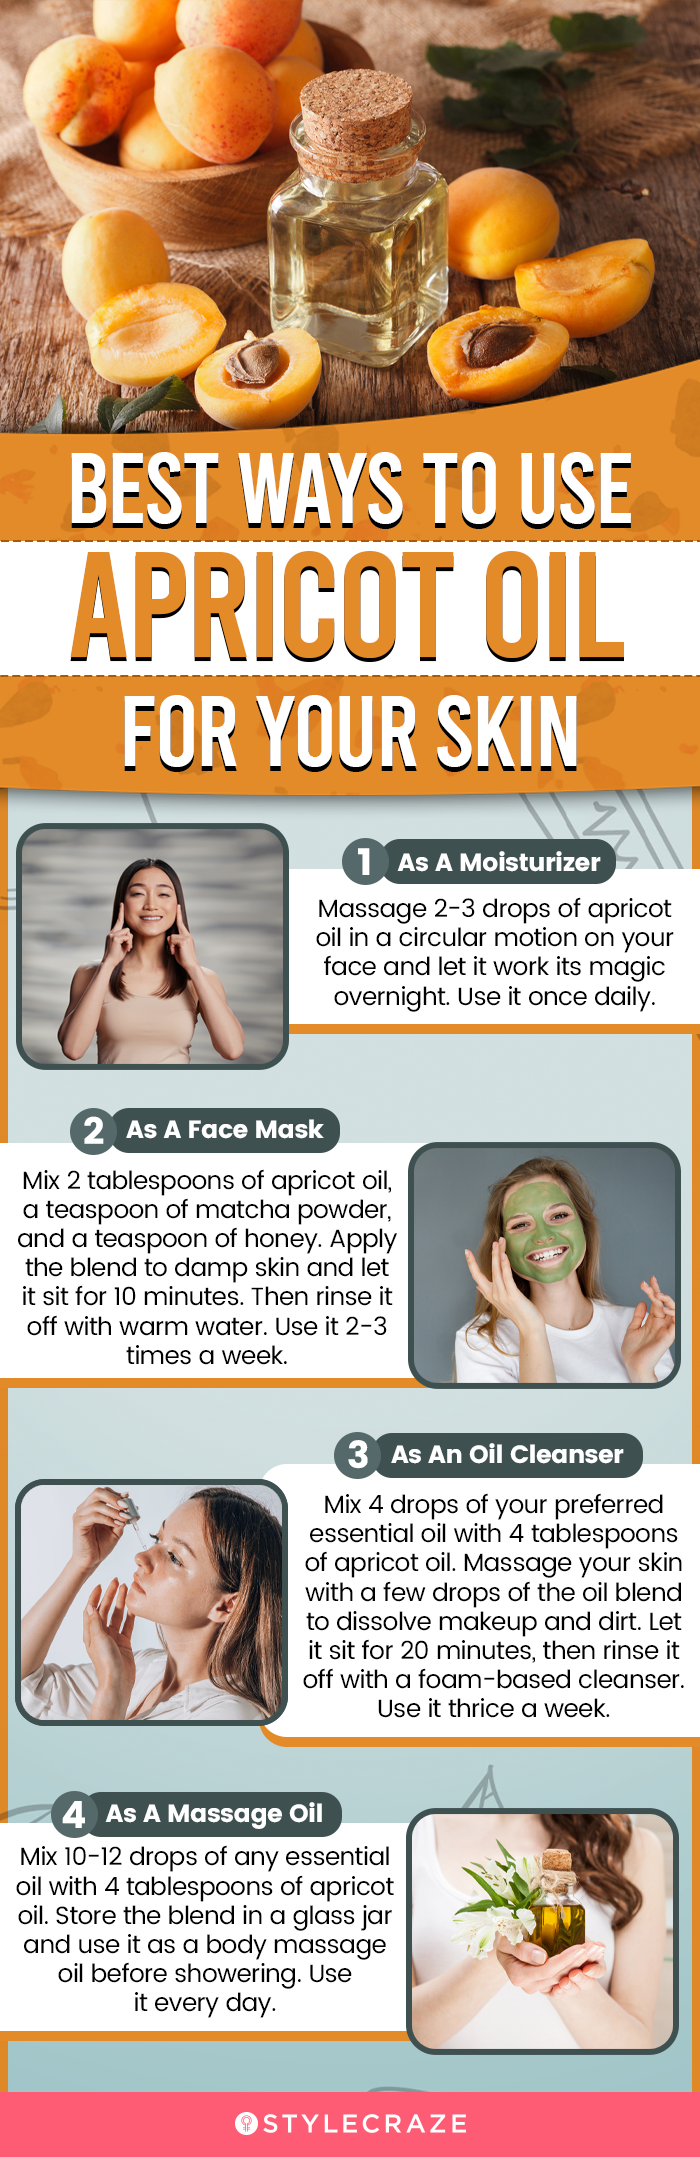 using apricot oil for your skin (infographic)